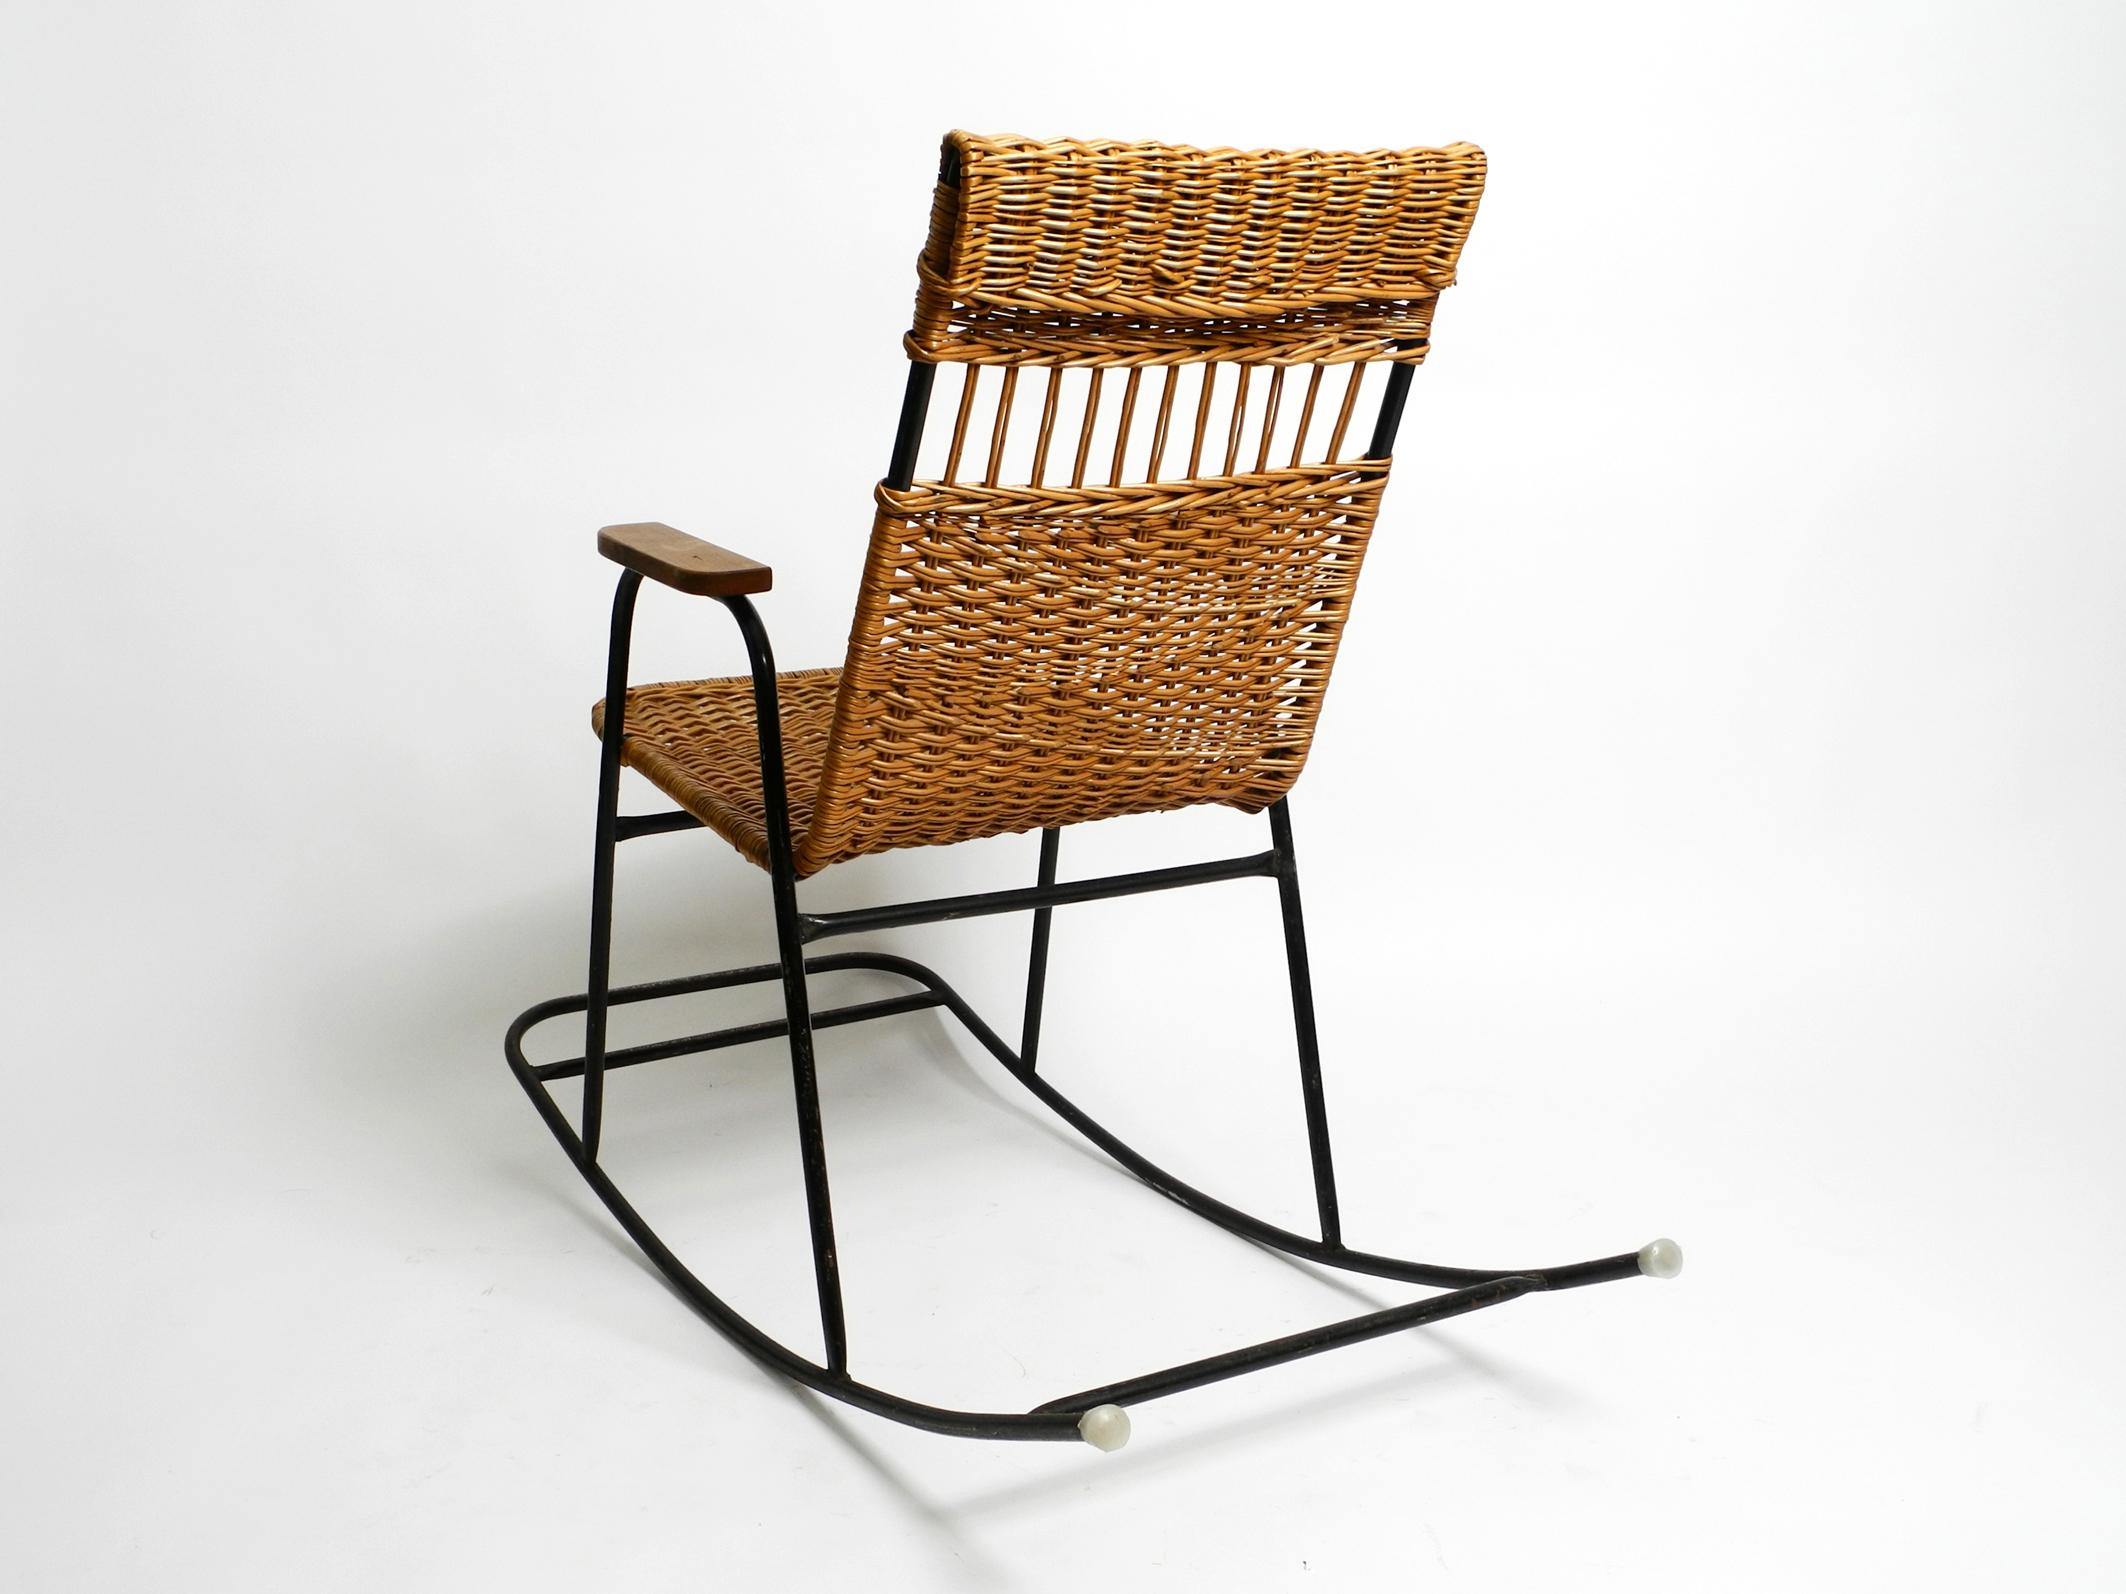 European Mid-Century Modern Rocking Chair Made of Black Painted Metal and Rattan For Sale